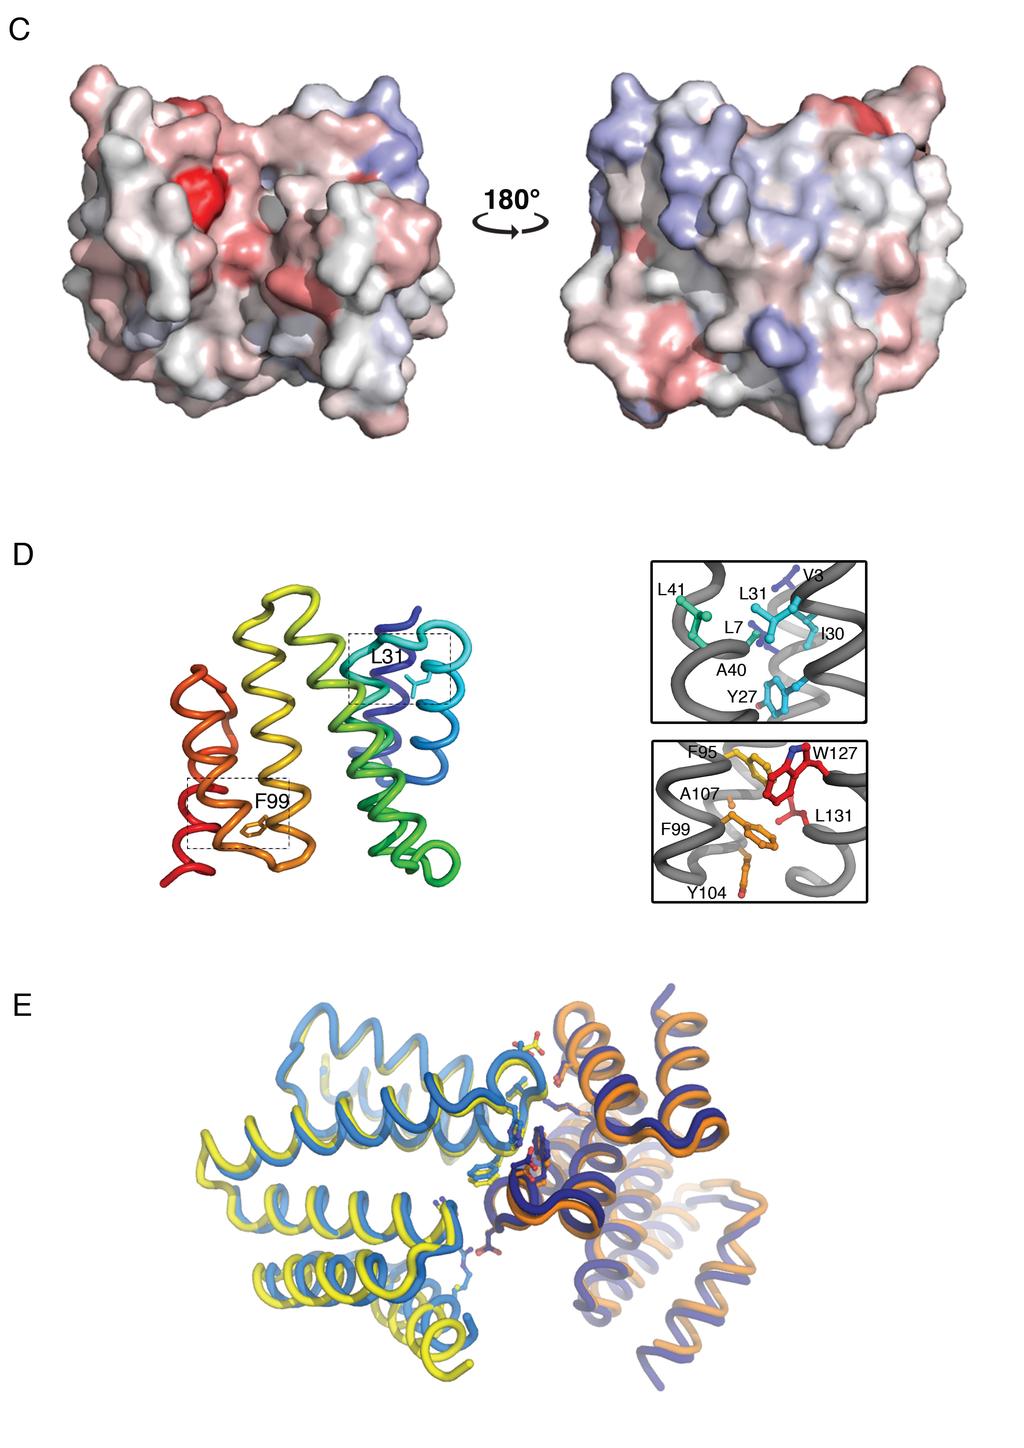 (A) RMSD fit for Ca atoms of the Sgt1TPR domain and TPR domains with high sequence identity.